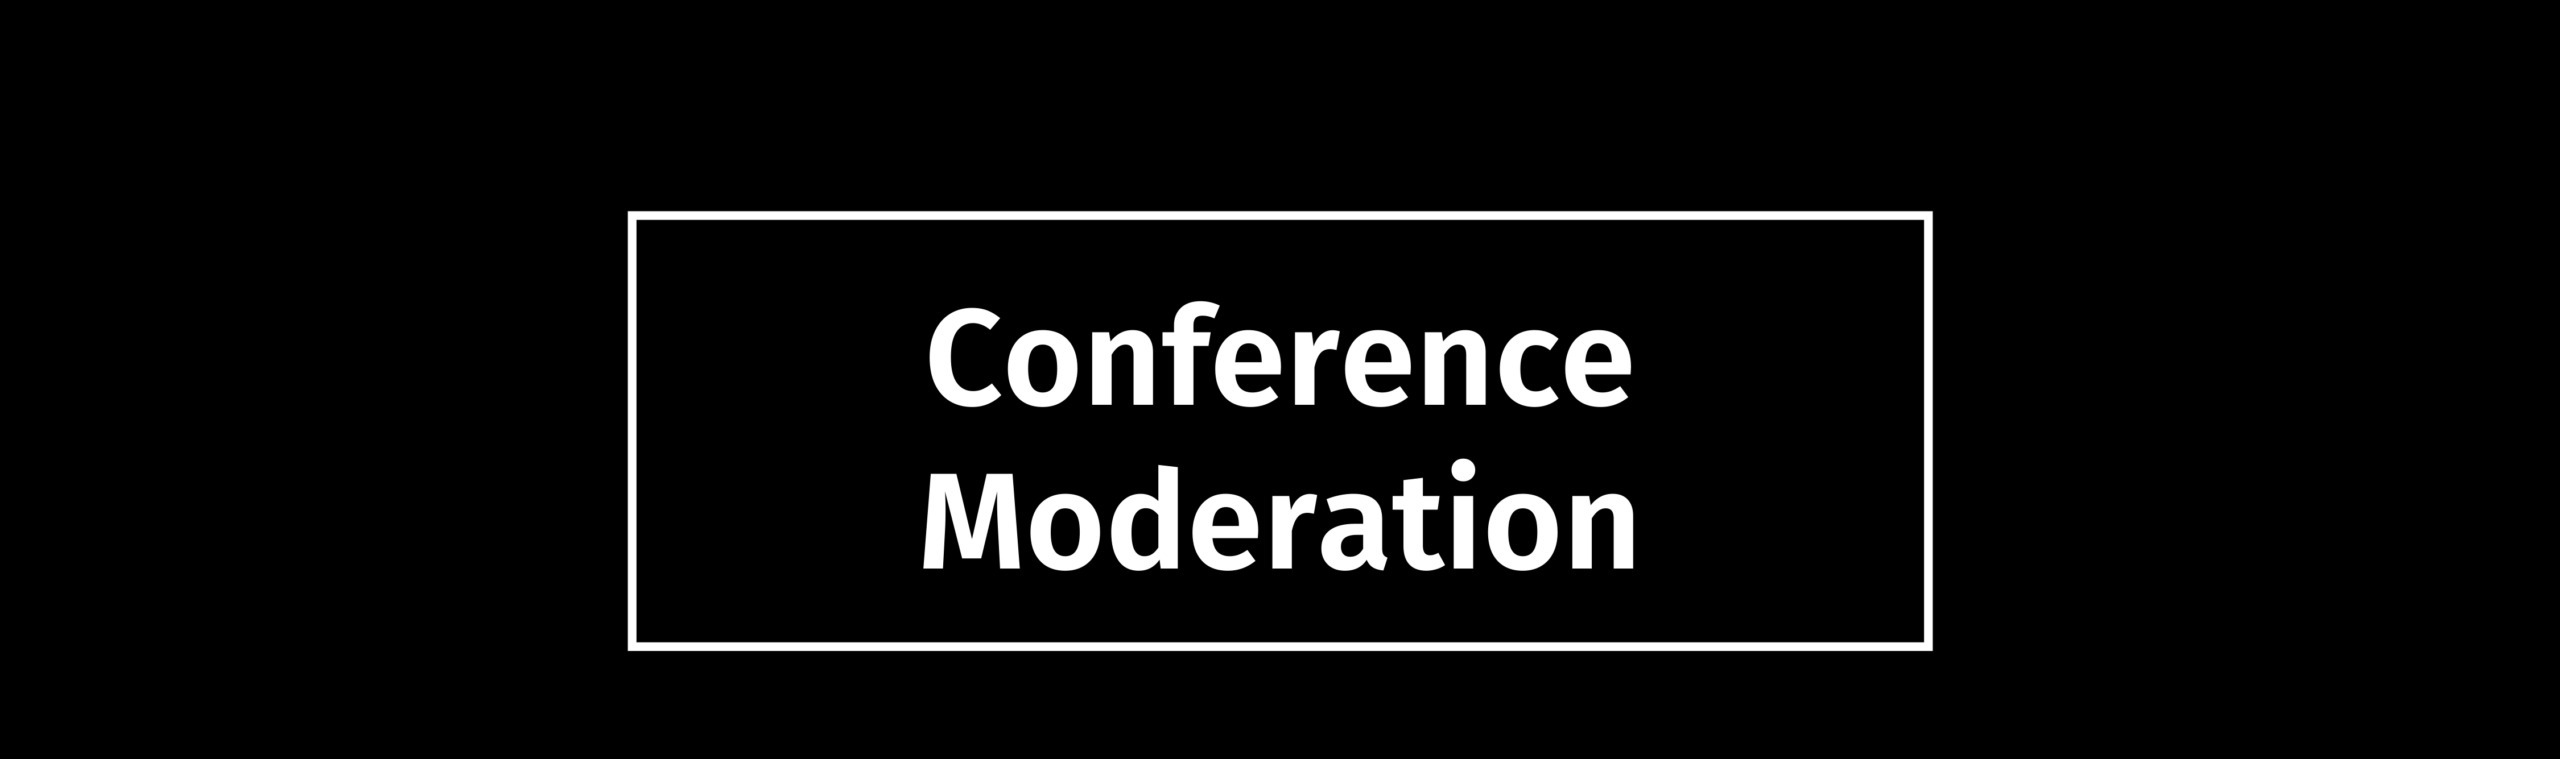 Page title: Conference moderation